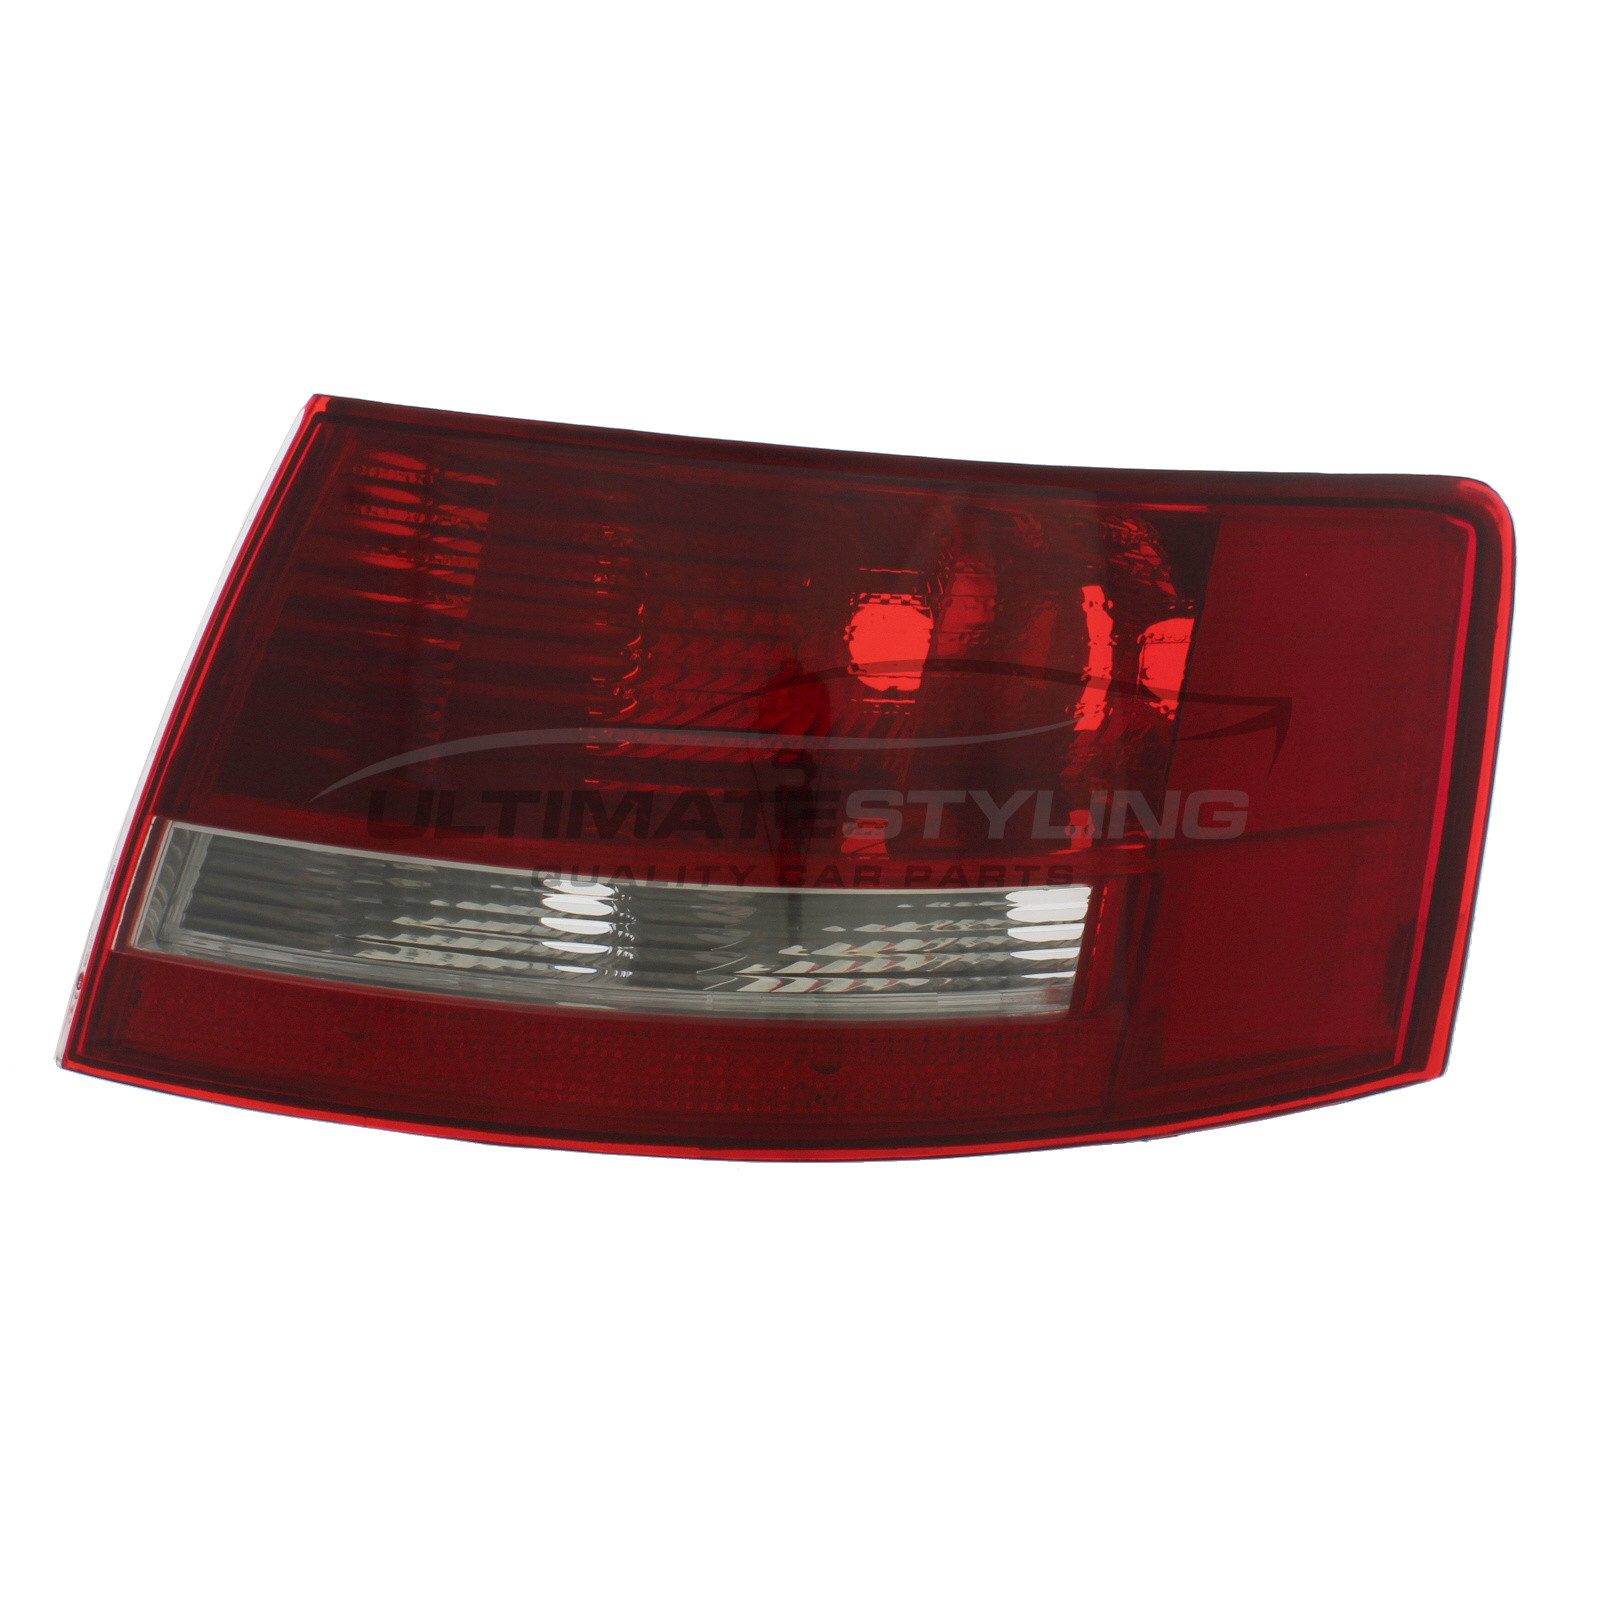 Audi A6 2004-2008 Non-LED with Clear Indicator Rear Light / Tail Light Excluding Bulb Holder Drivers Side (RH)